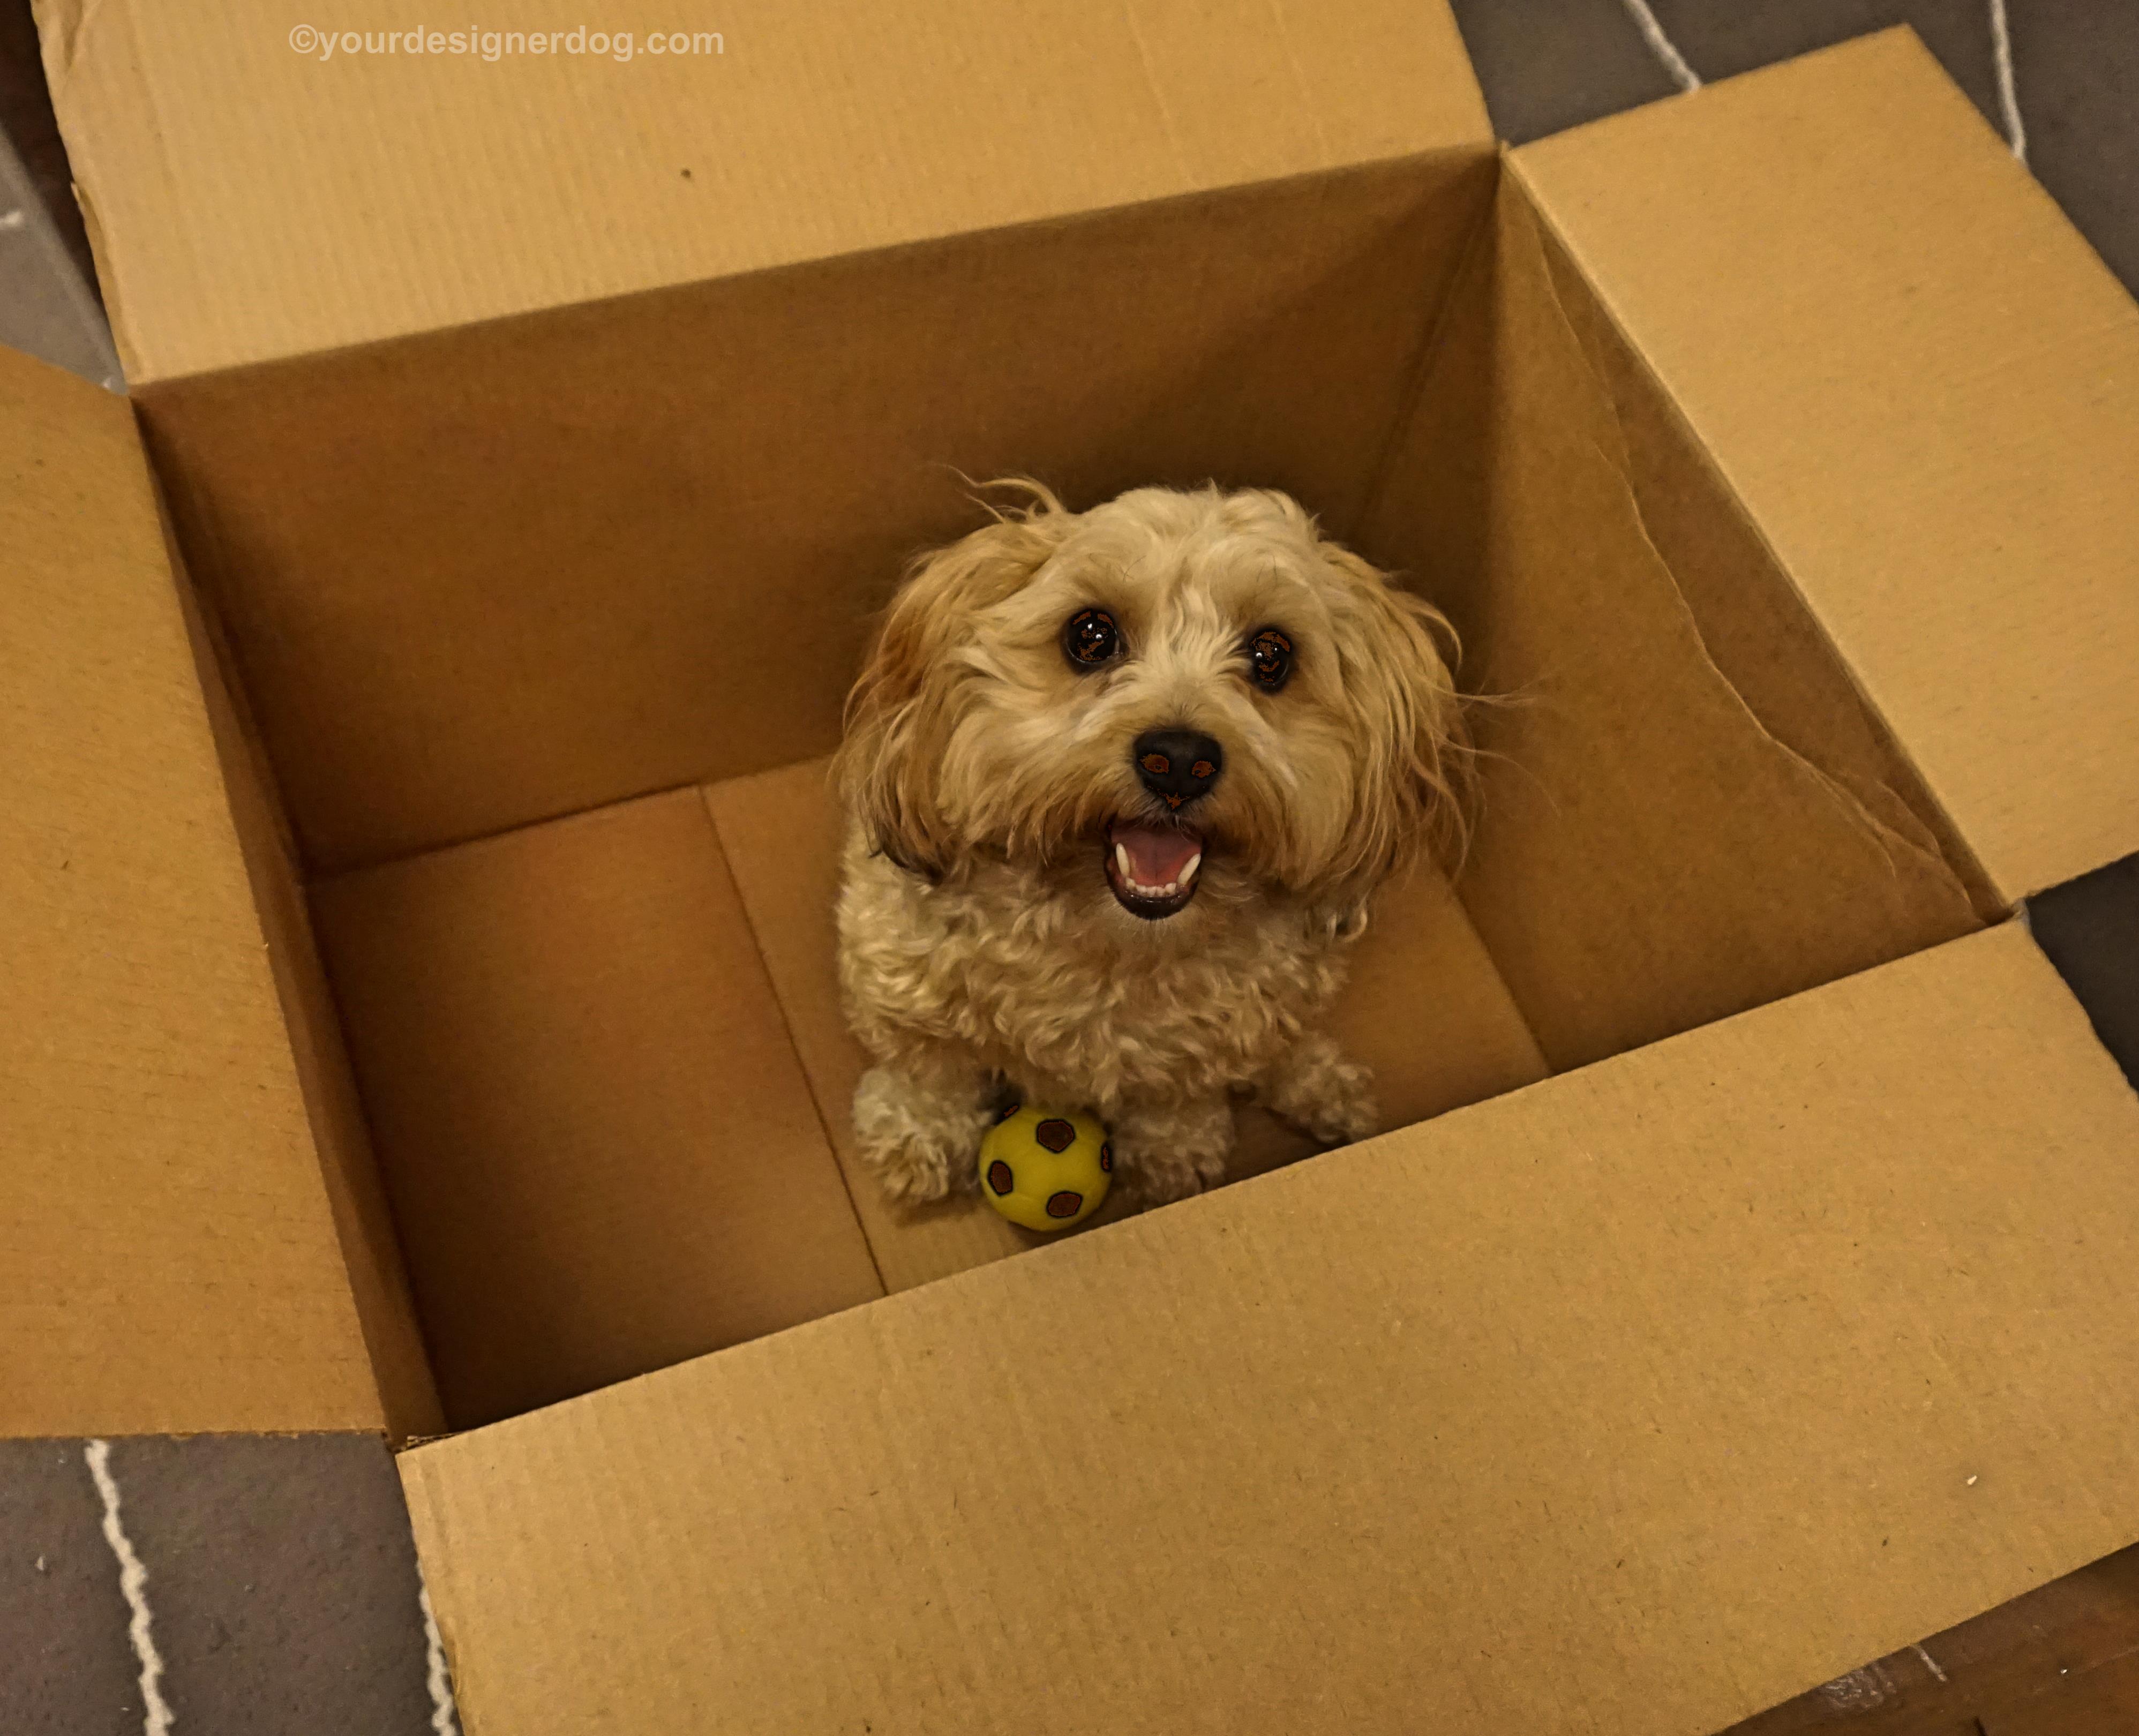 dogs, designer dogs, Yorkipoo, yorkie poo, moving, tongue out, dog smiling, box